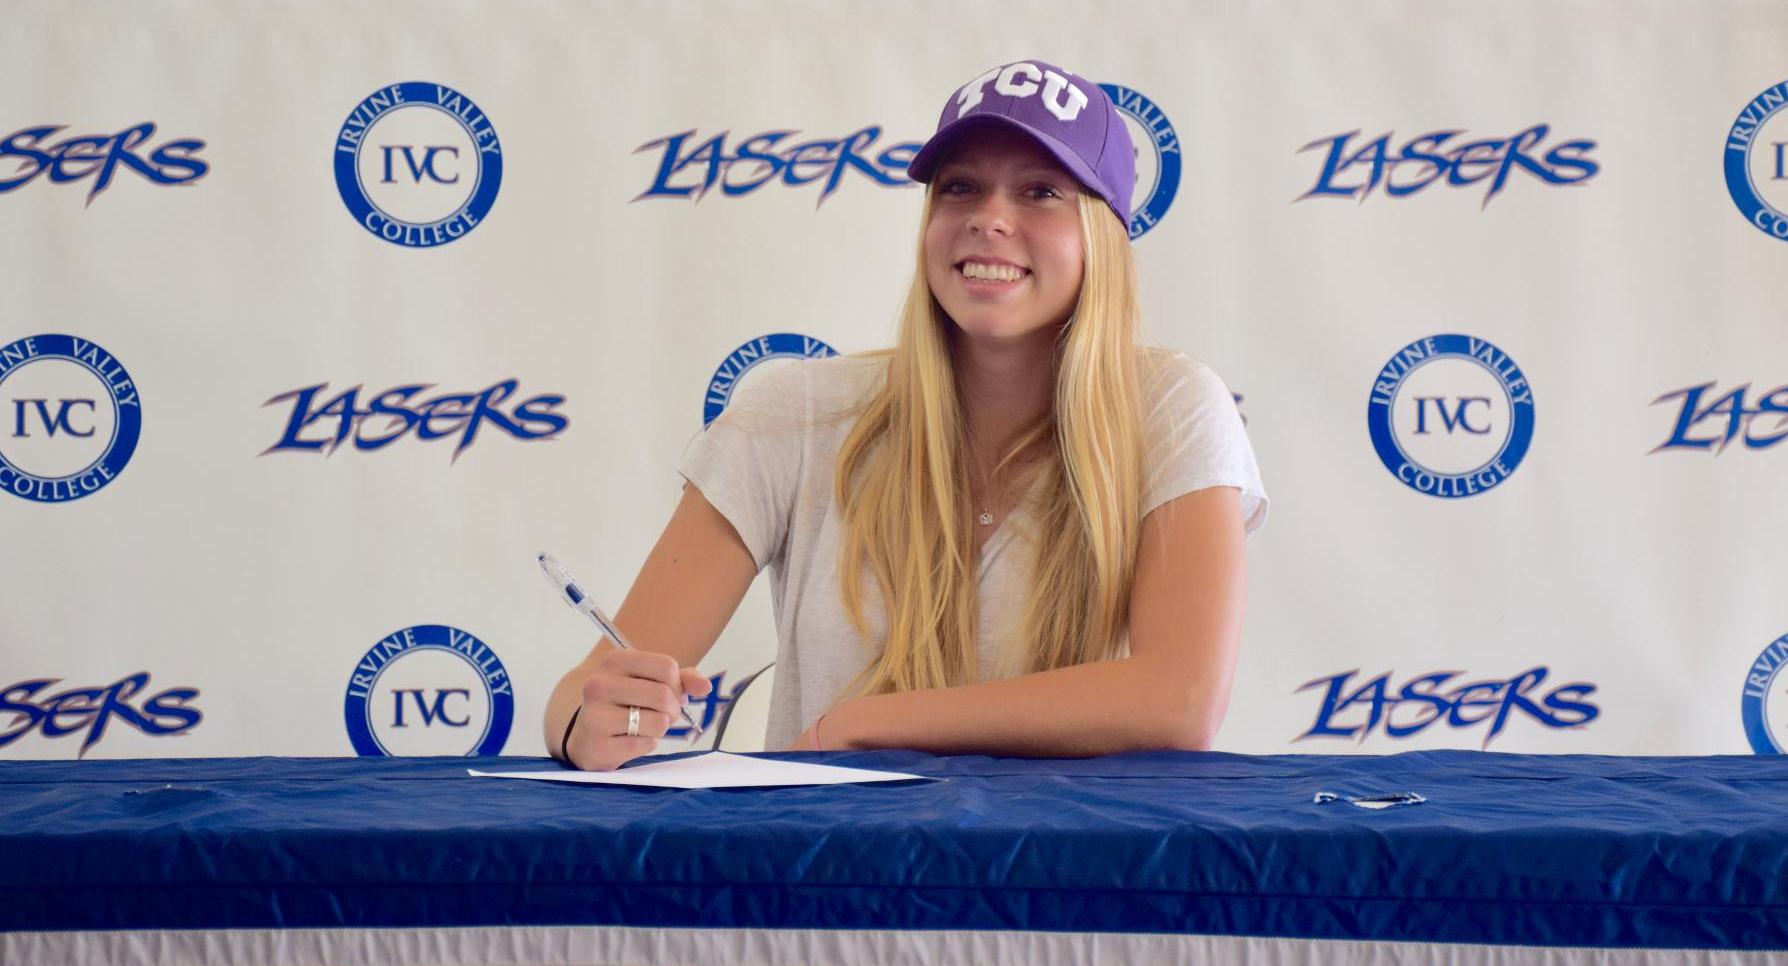 Women's volleyball player Kayla Scheevel signs with TCU